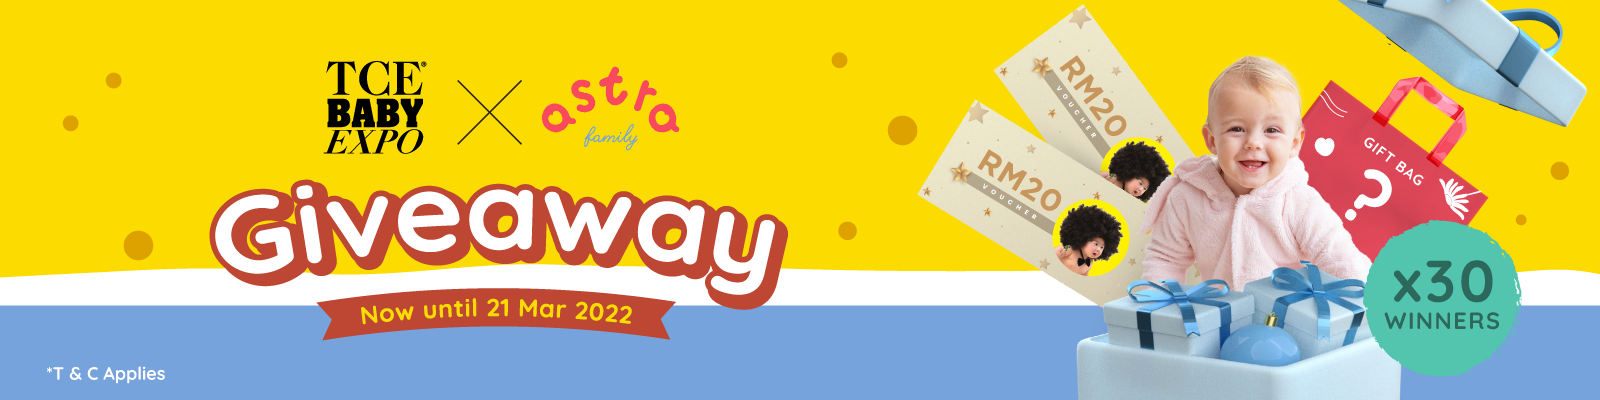 Astra Family x TCE Baby Expo GIveaway